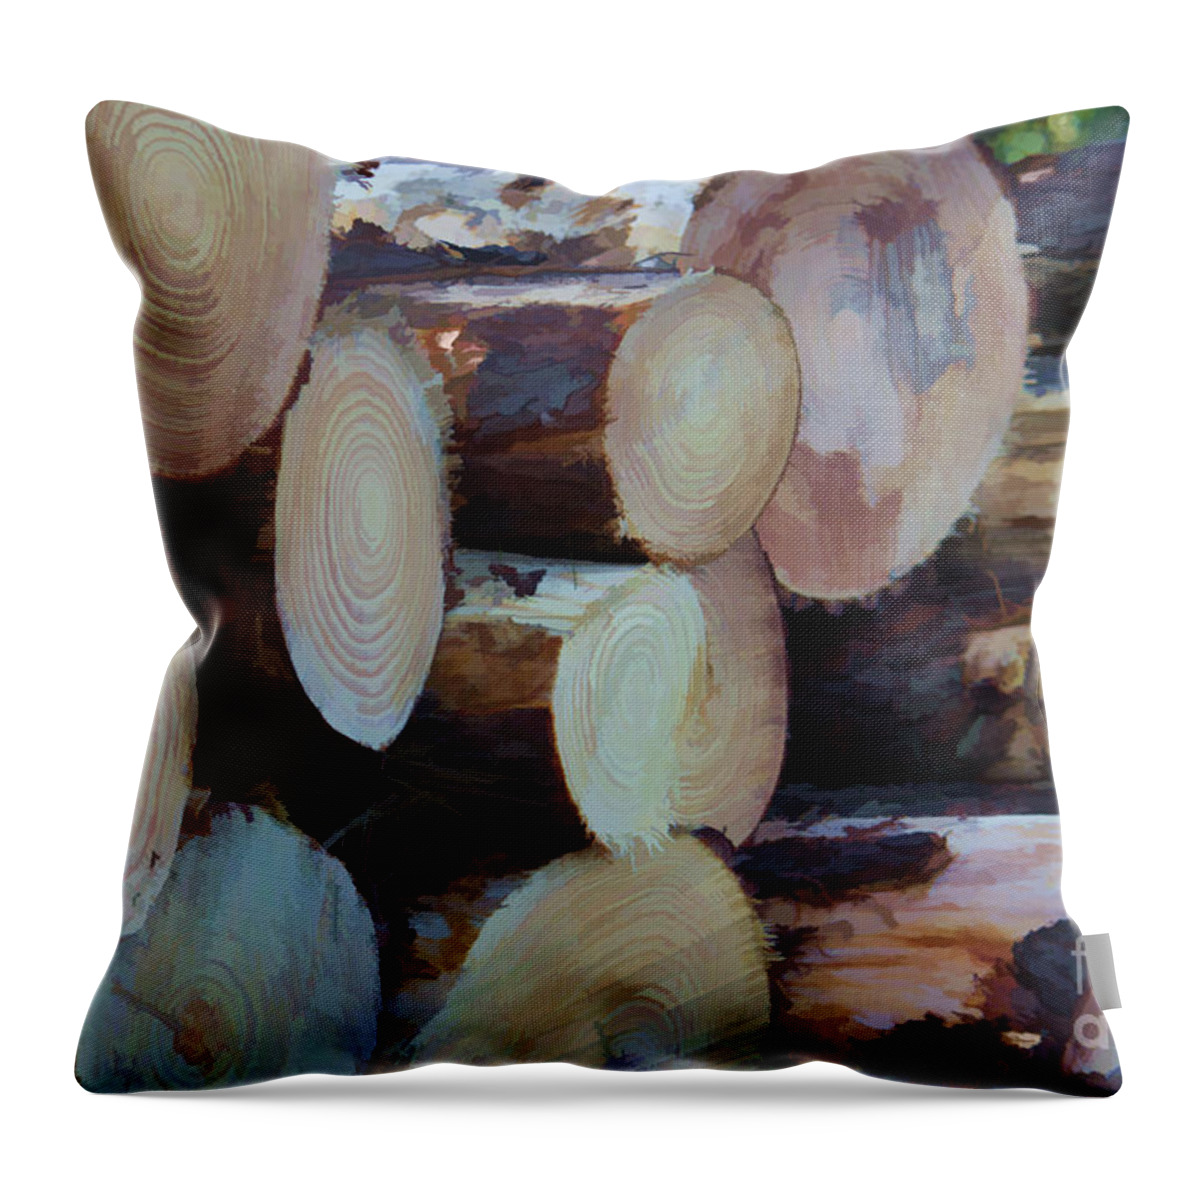 Abstract Throw Pillow featuring the photograph Abstract Log Pile by Roberta Byram